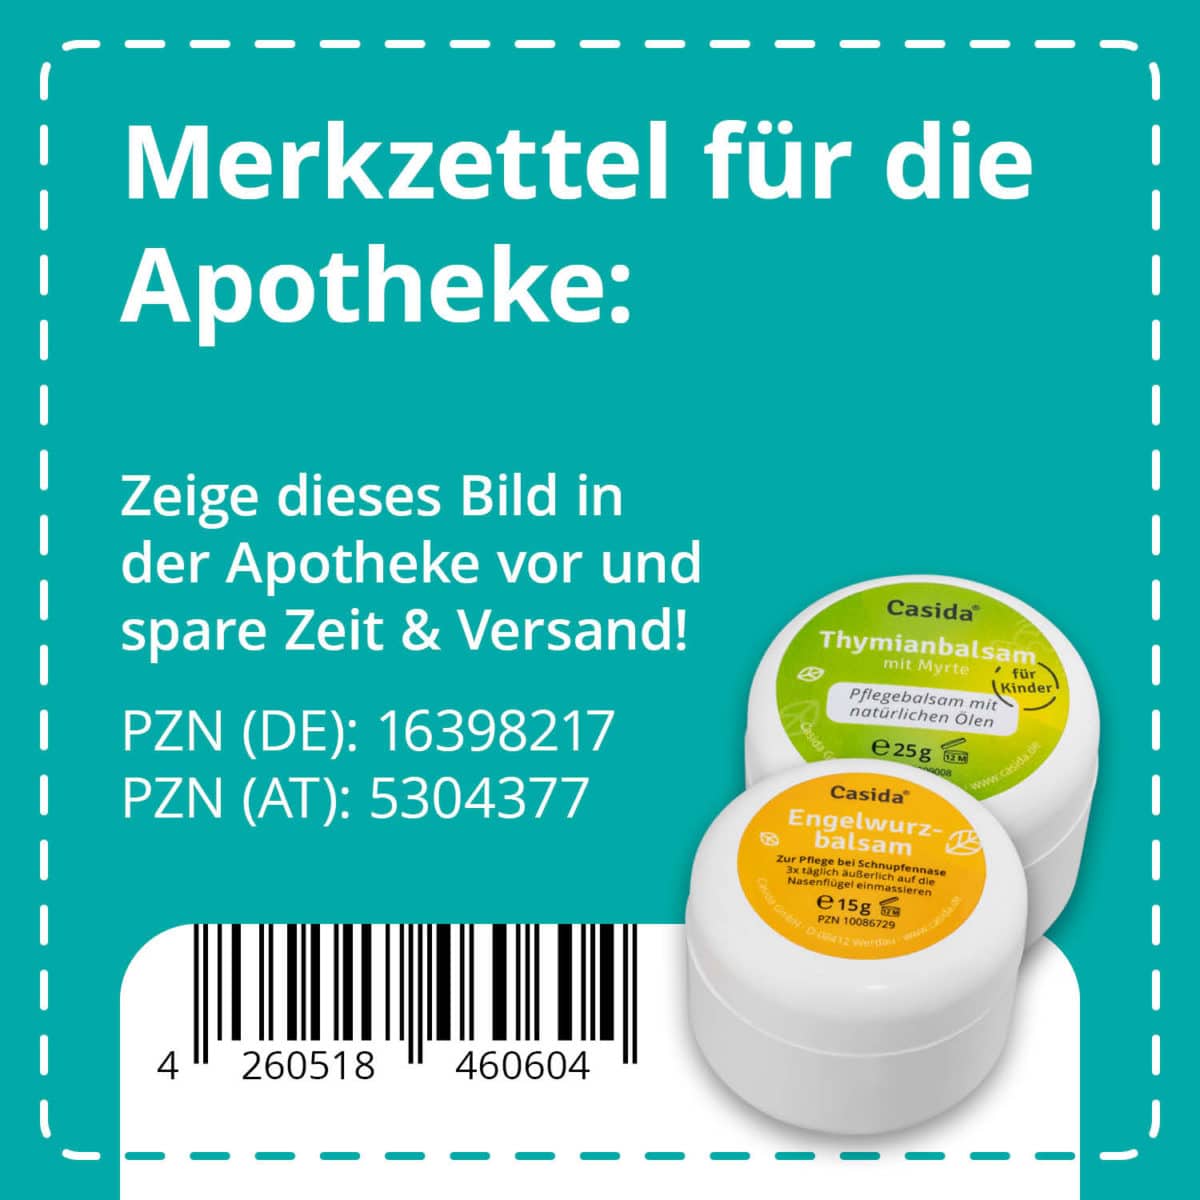 Casida Product Combo Angelica Balm and Thyme Balm for Children 10209008 10086729 PZN Apotheke Erkältung Baby pflanzlich behandeln9